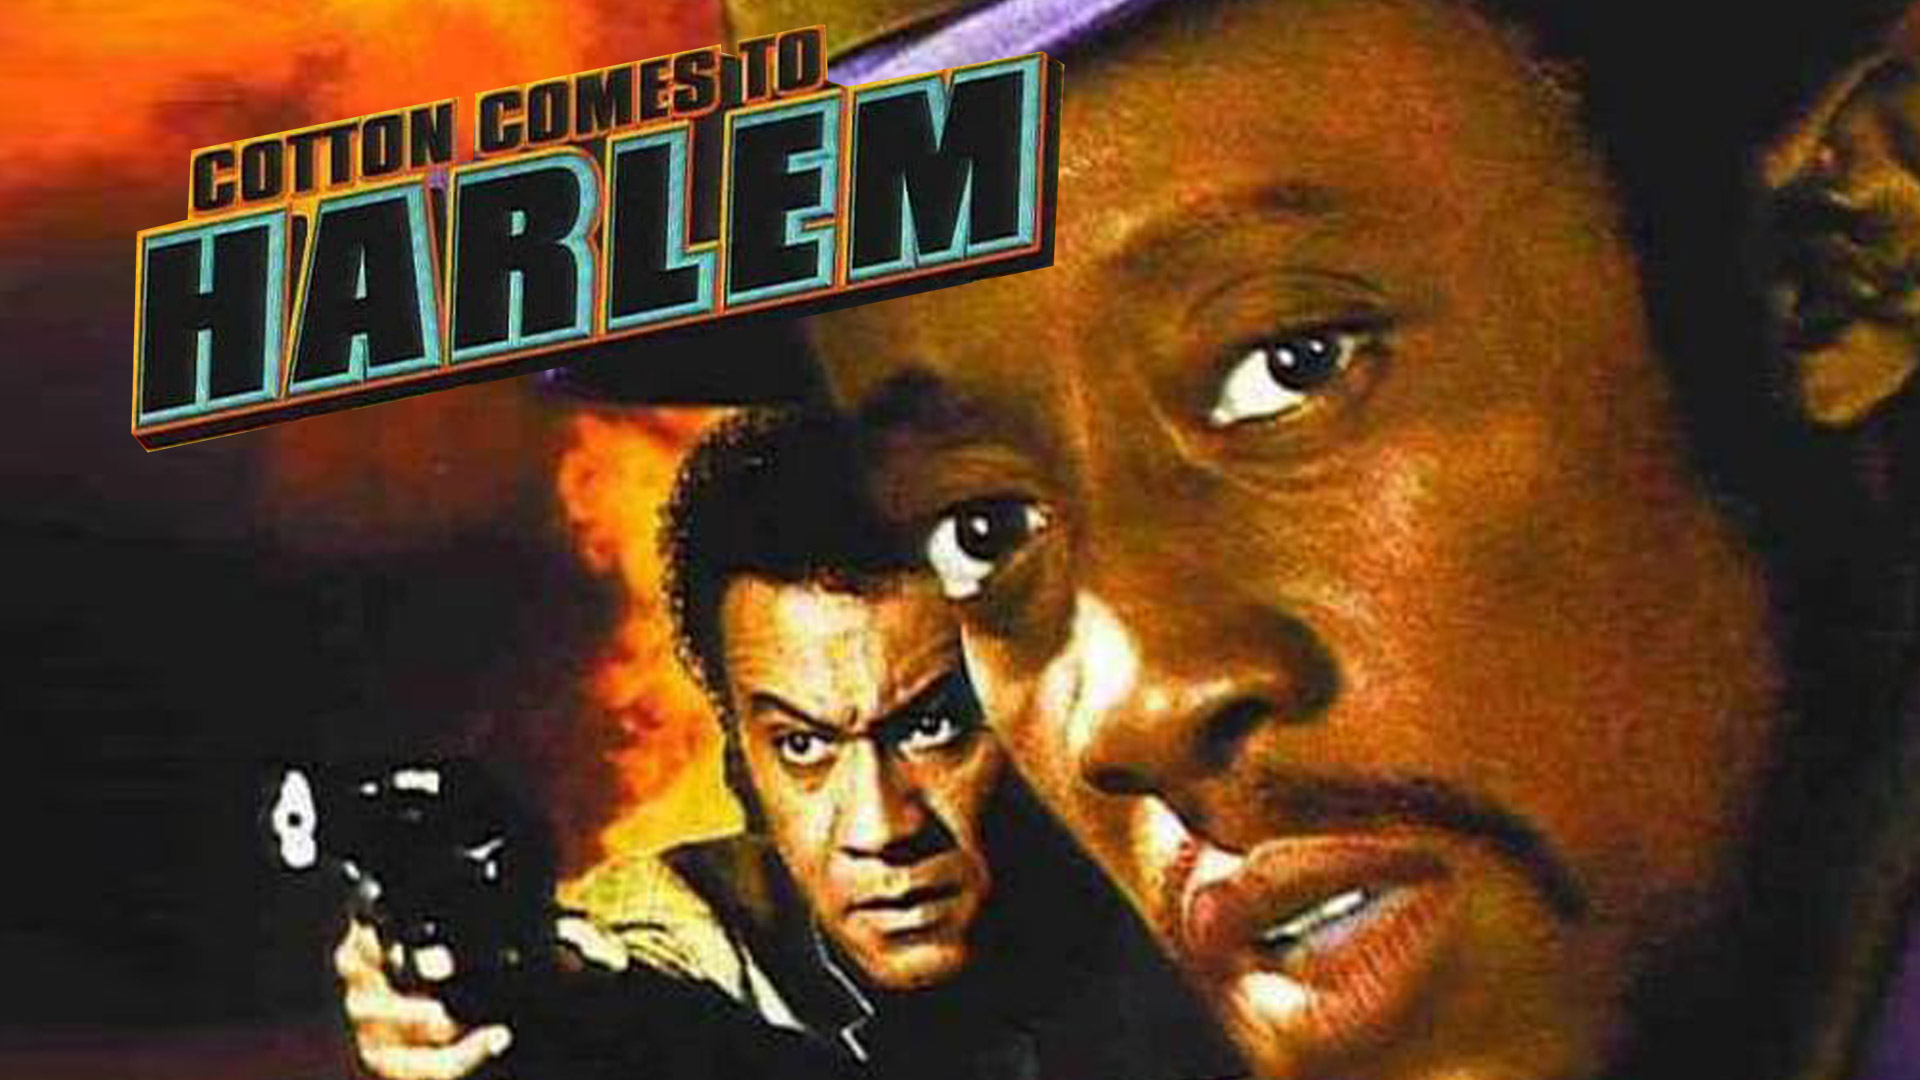 Cotton Comes to Harlem (1970) – Action, Comedy, Crime